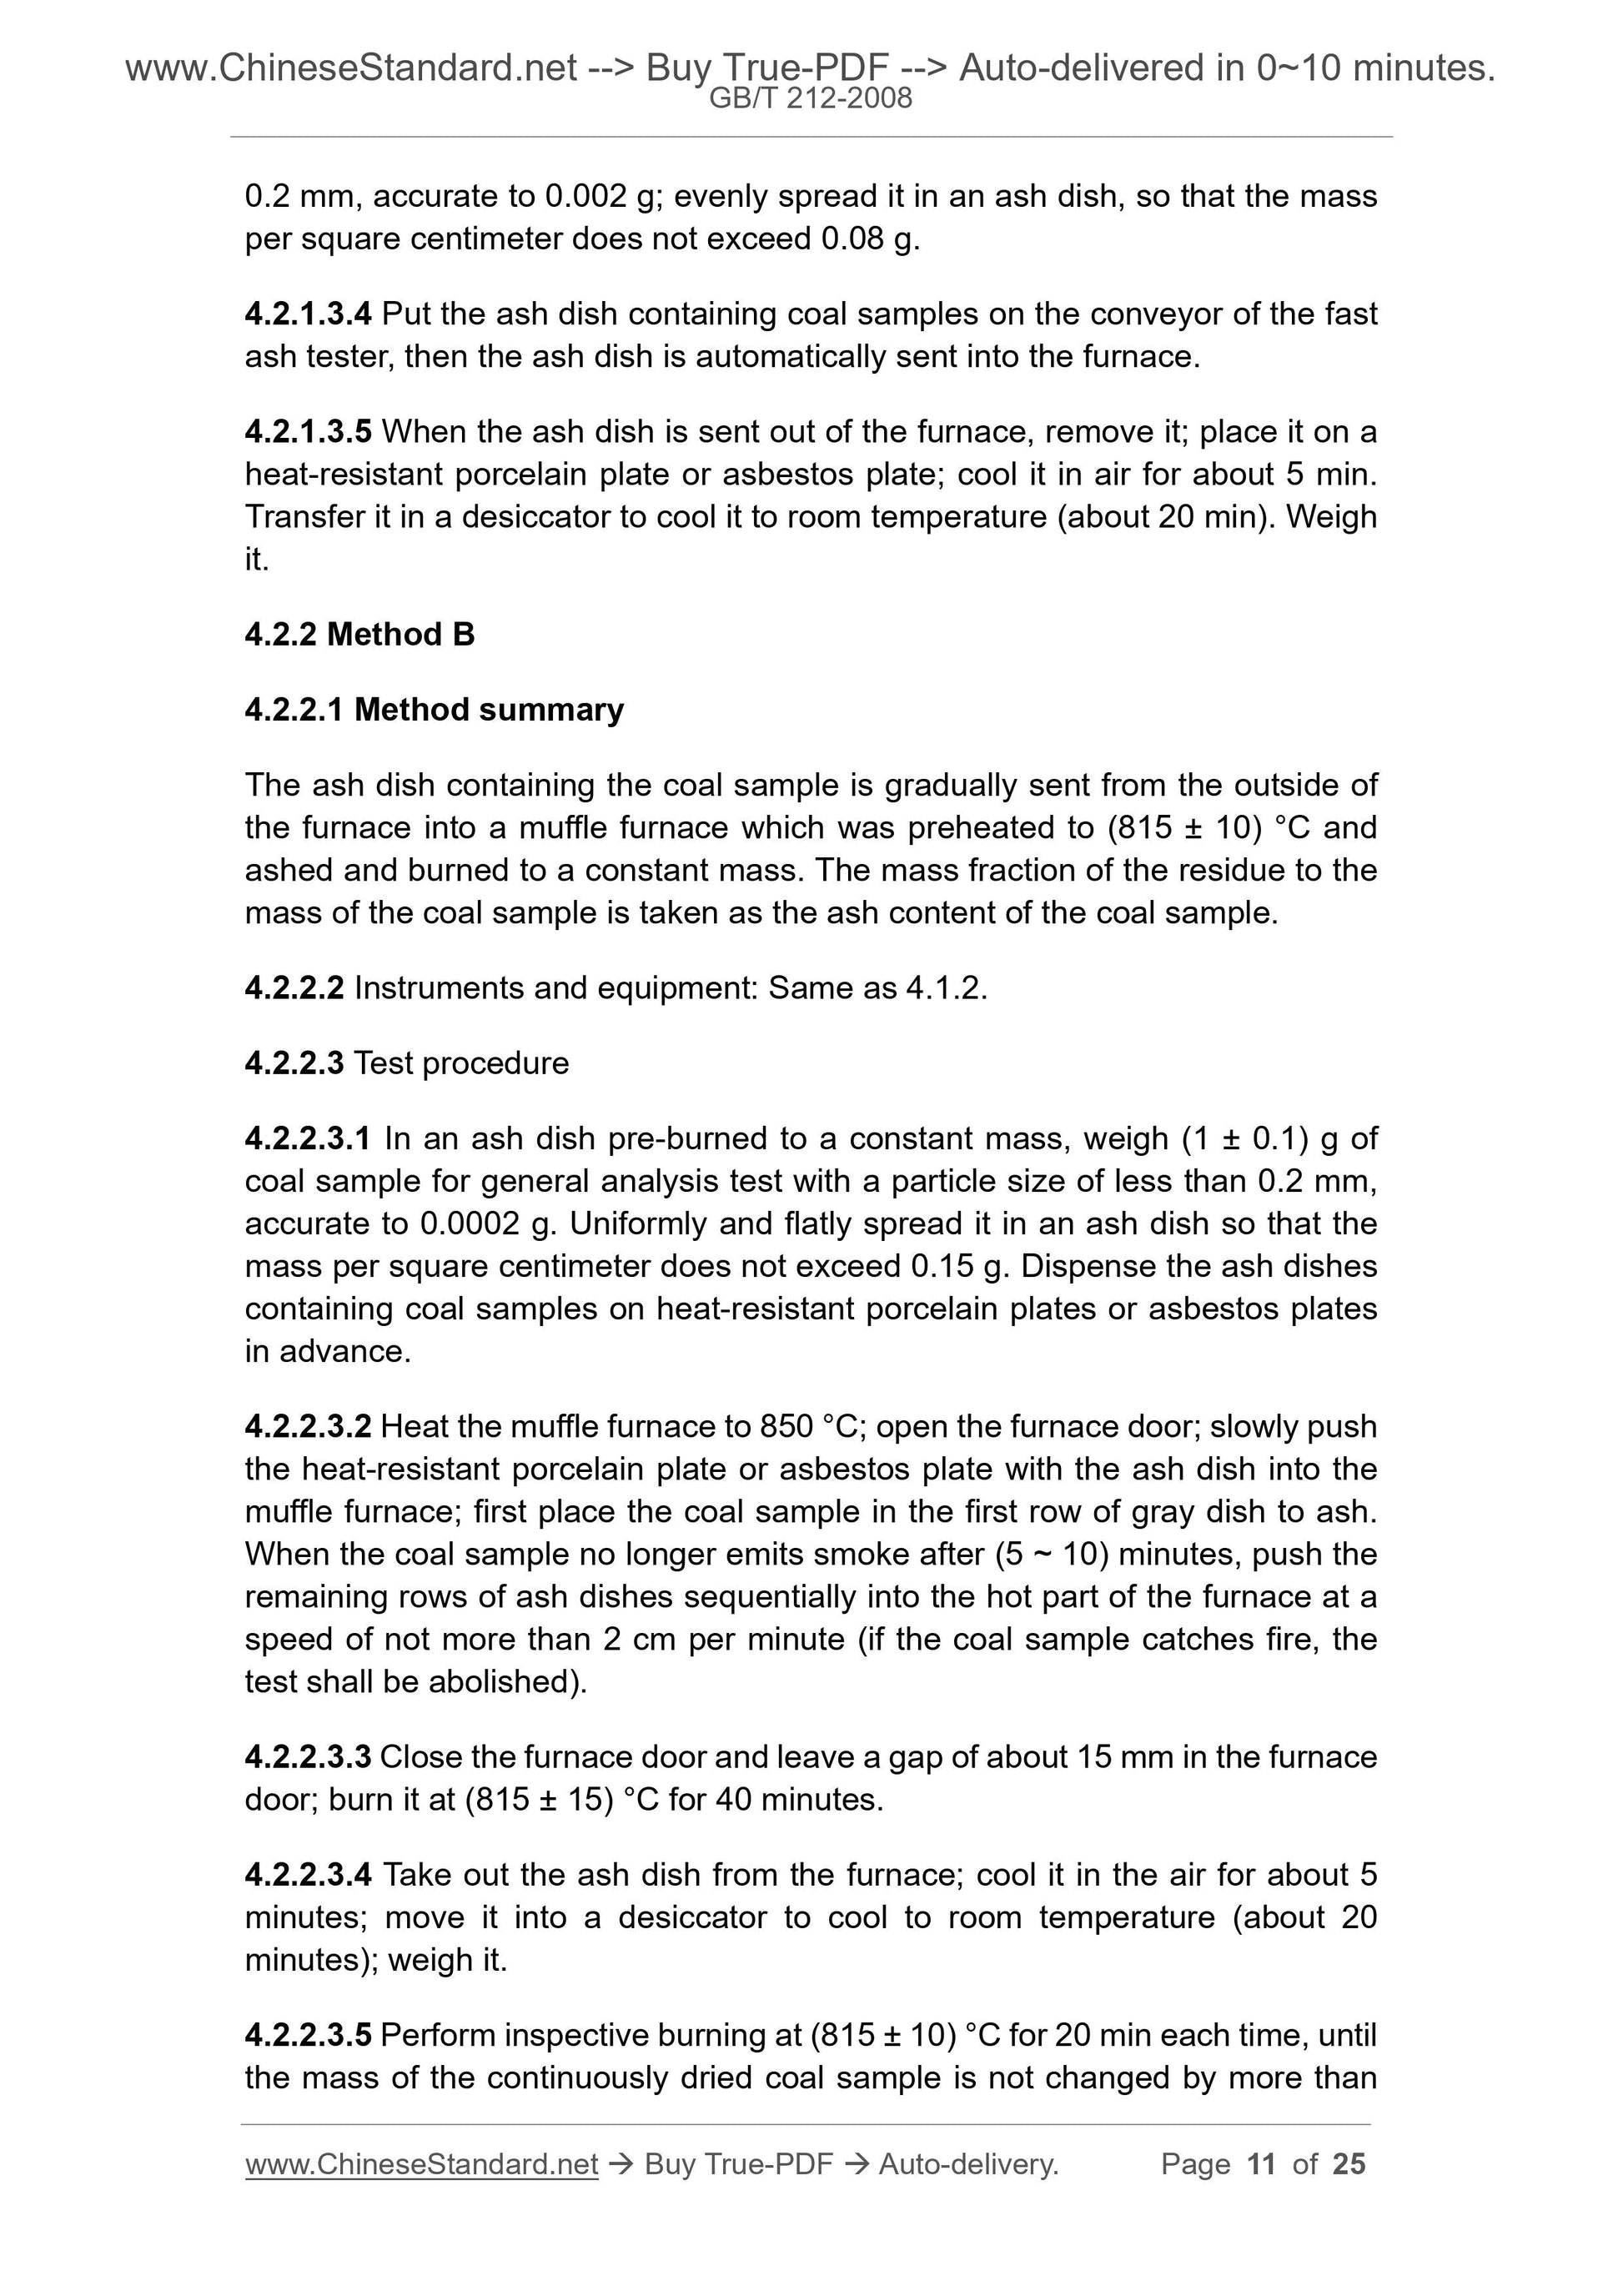 GB/T 212-2008 Page 5